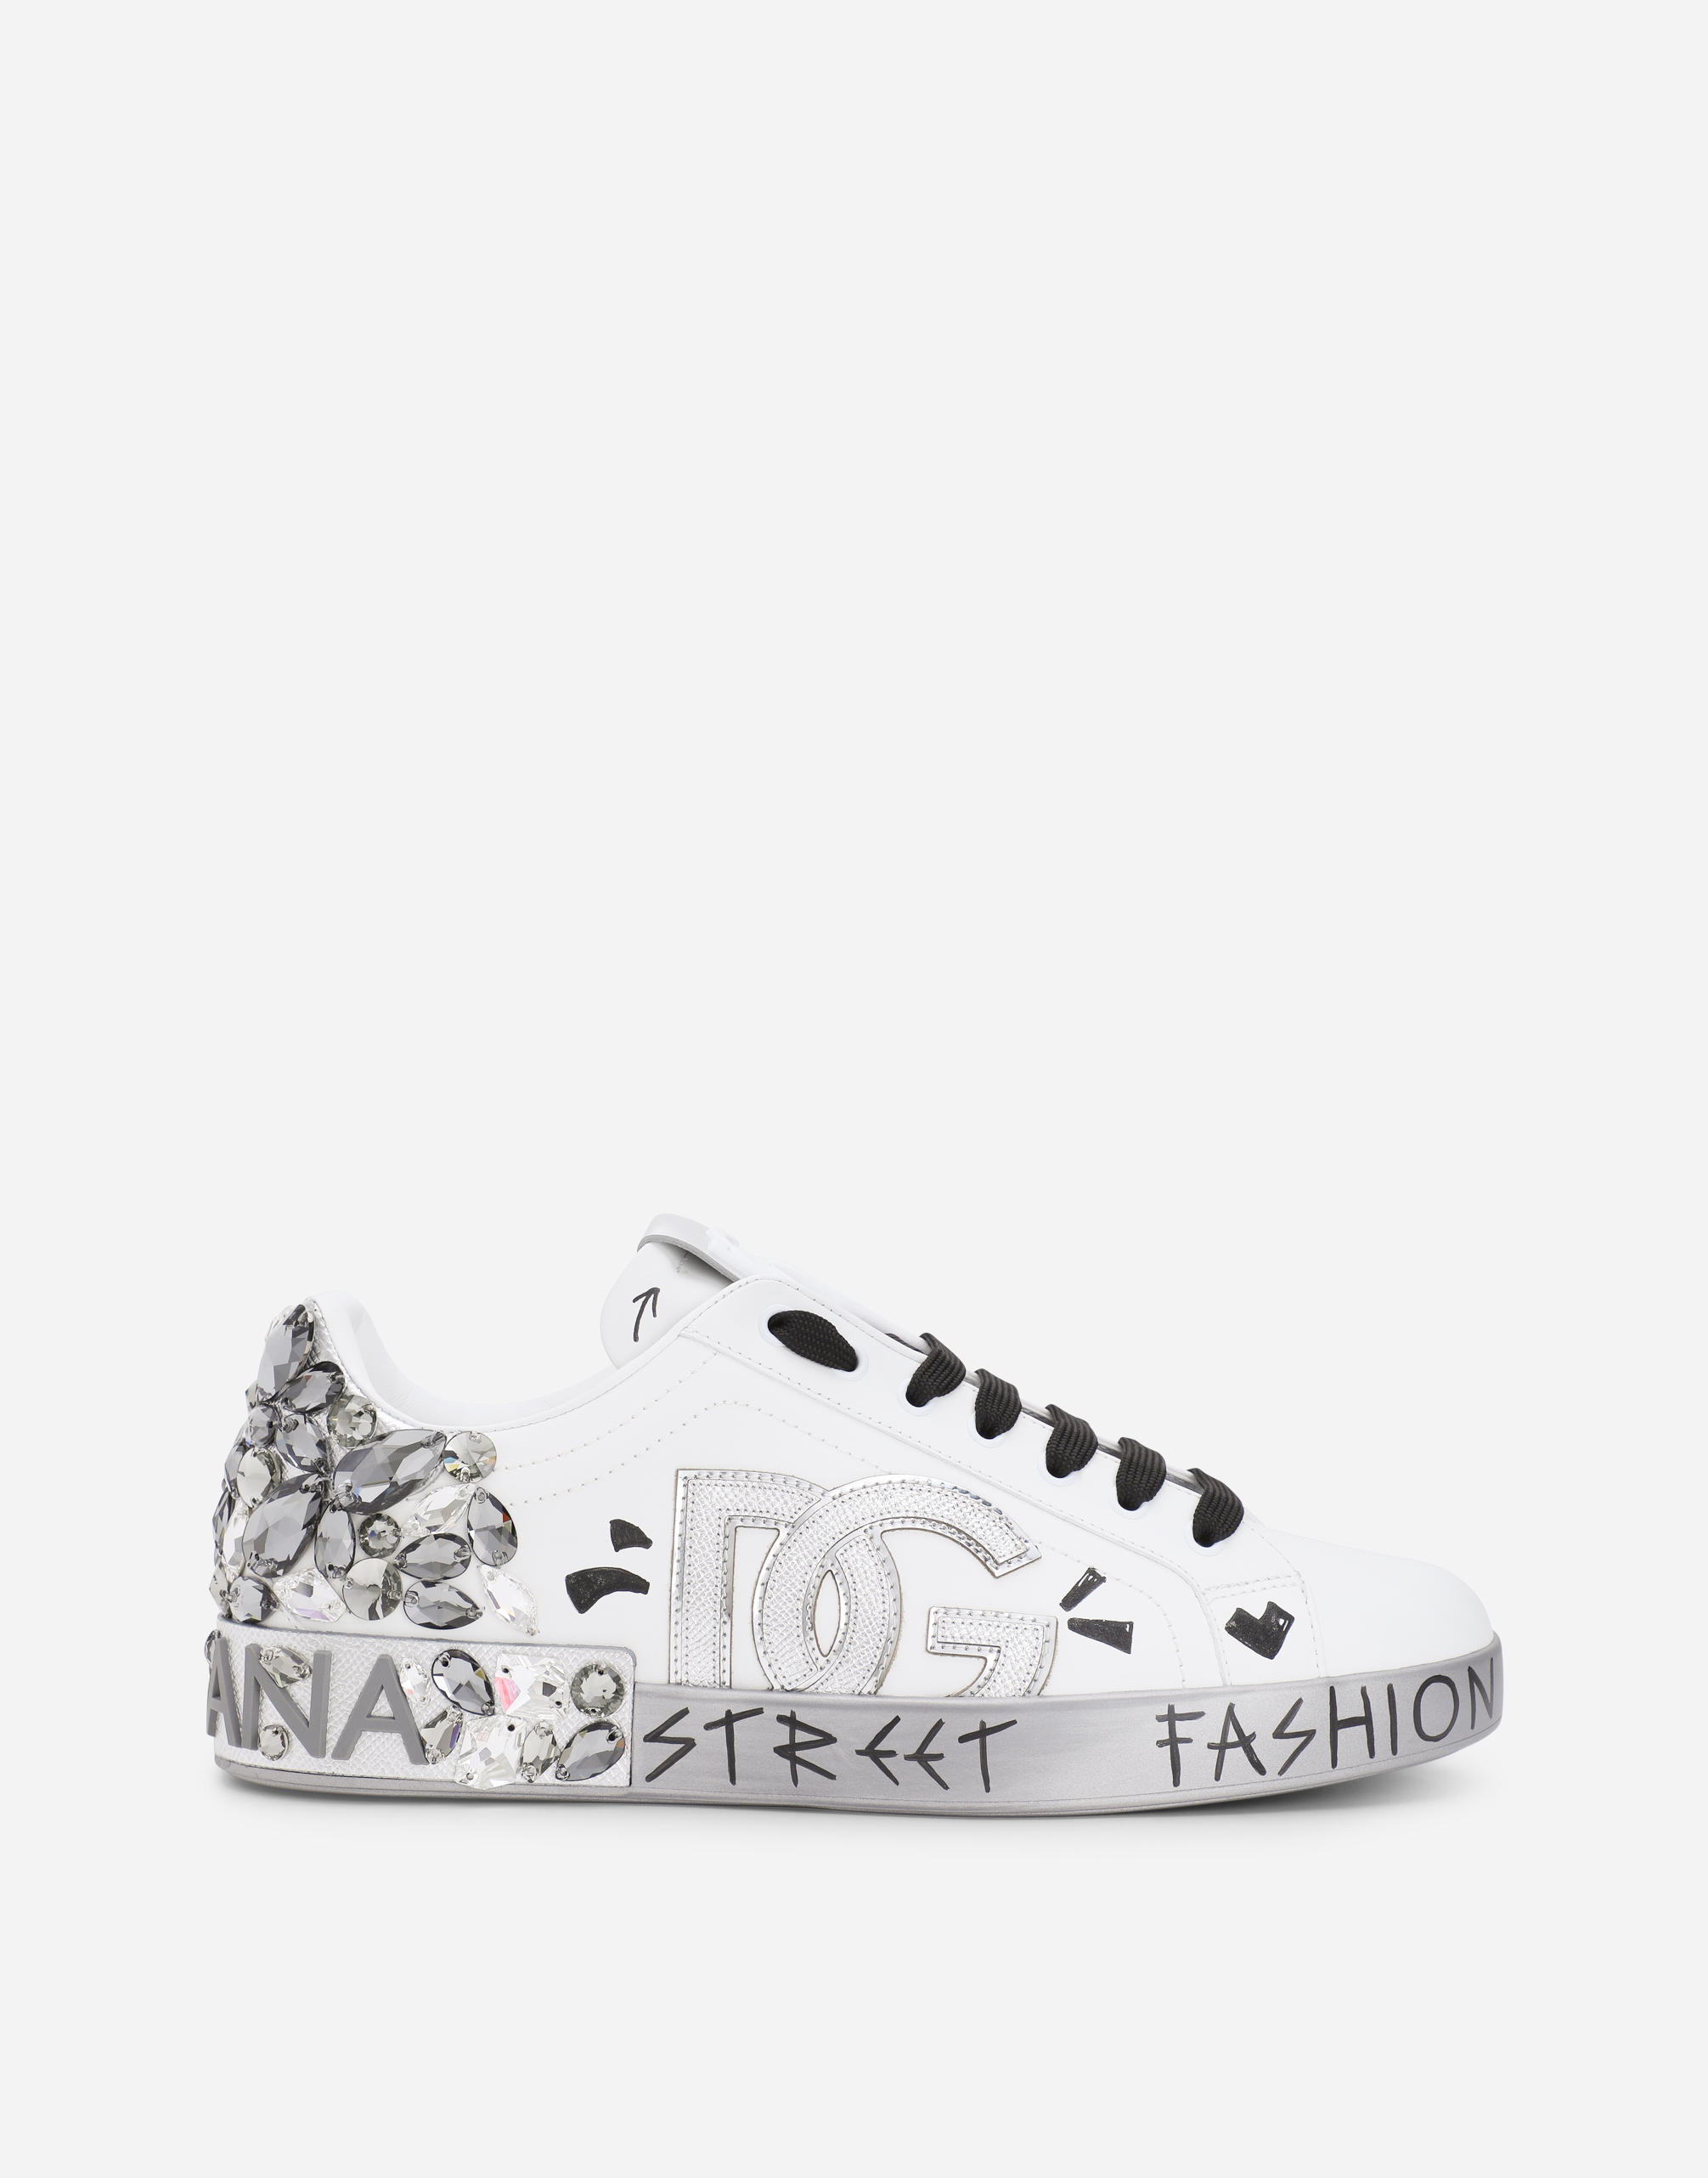 Printed calfskin nappa Portofino sneakers with DG logo and embroidery in White/Silver